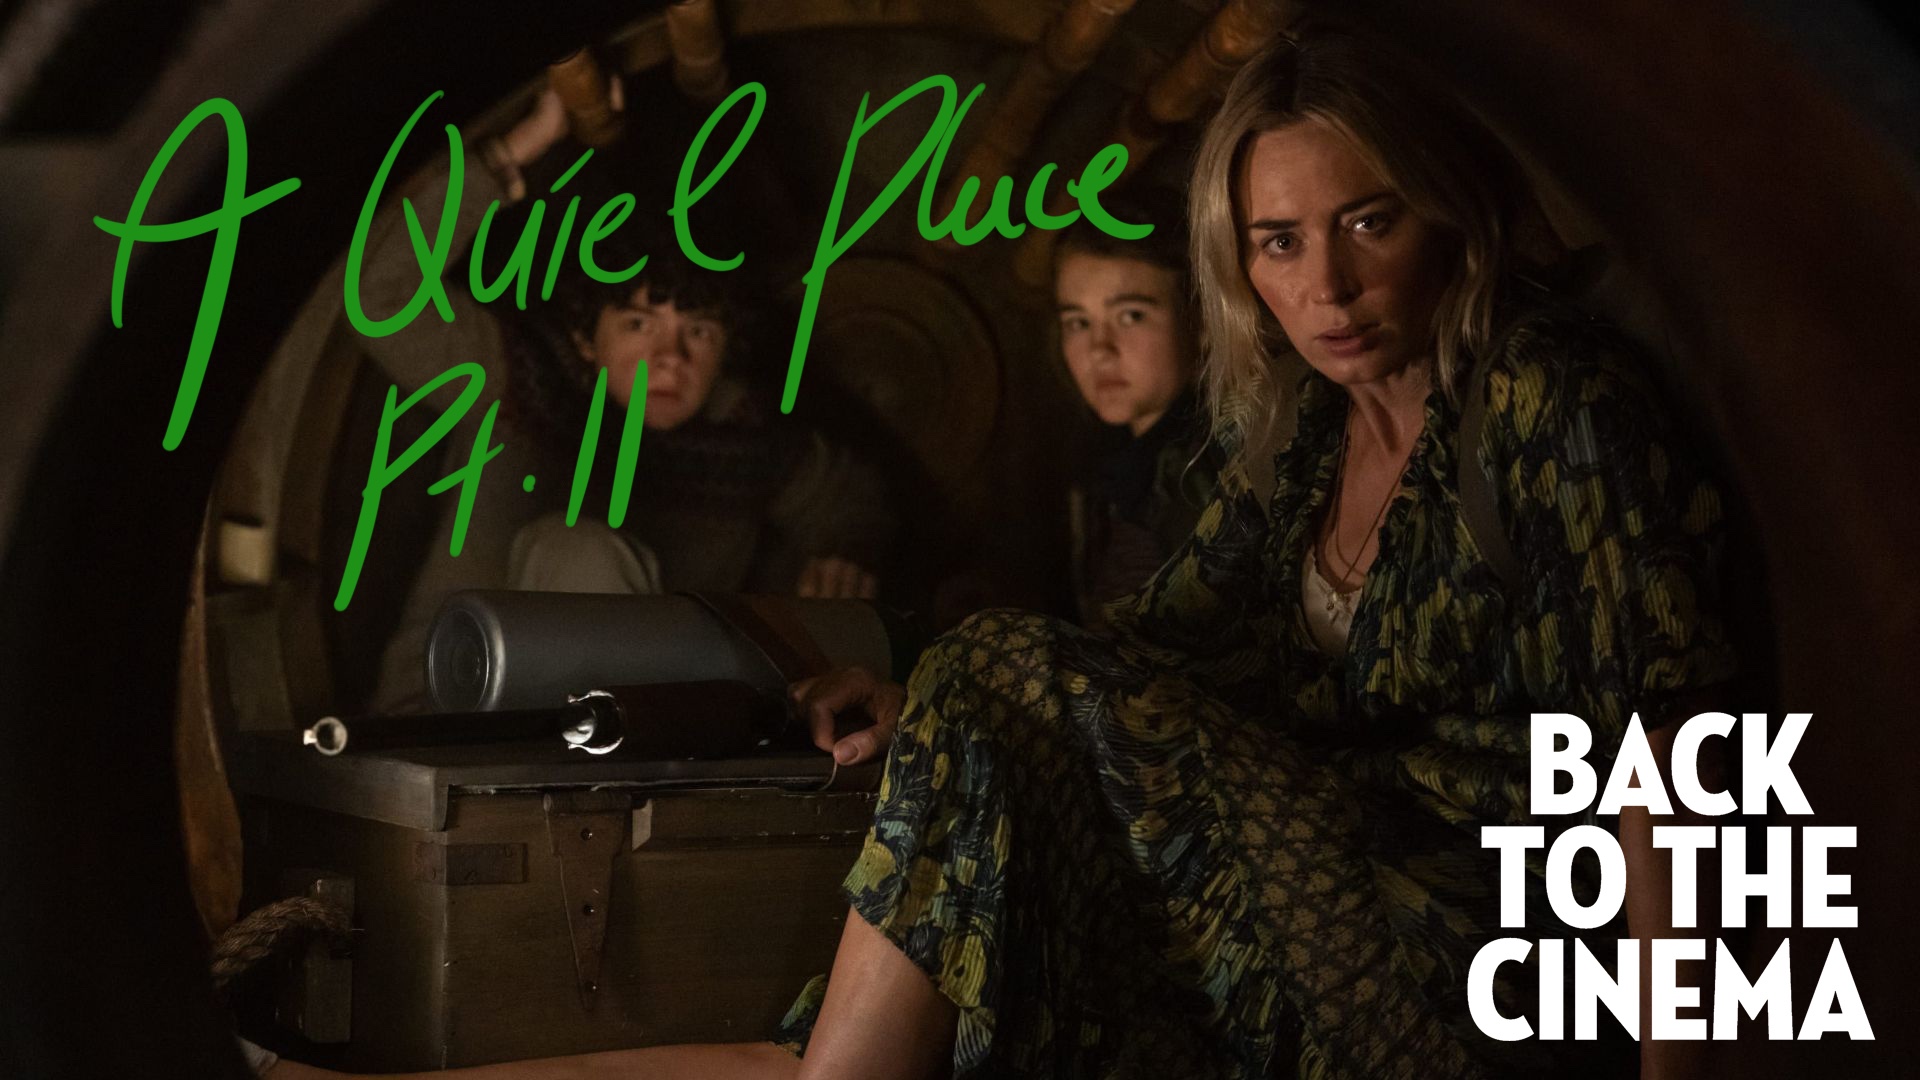 a quiet place 2 running time